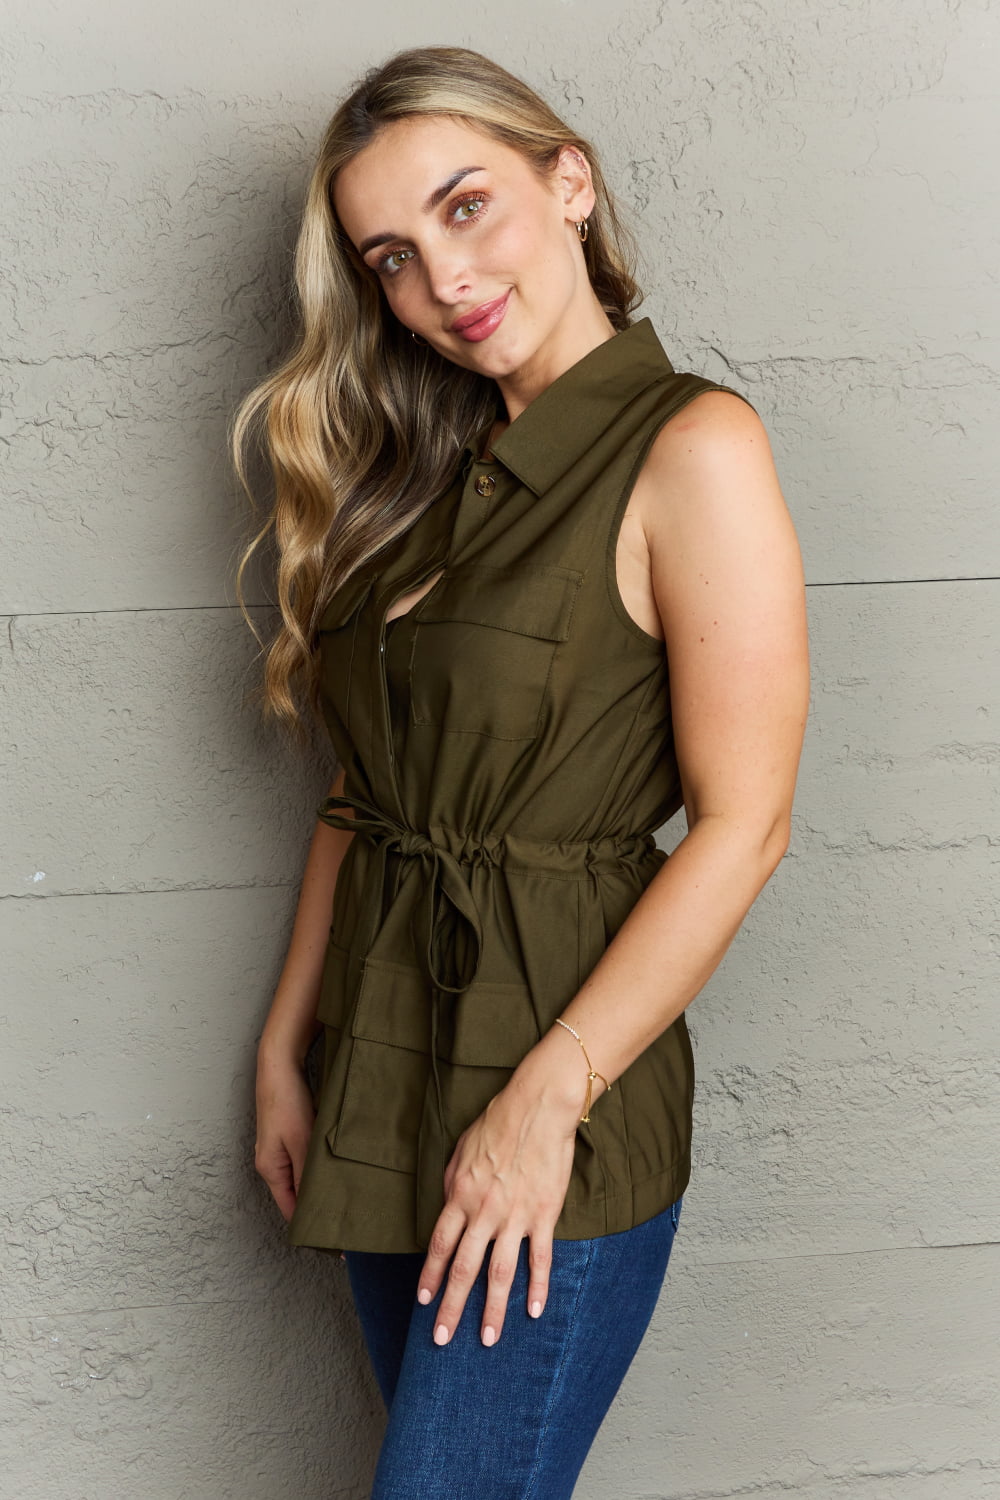 Ninexis Follow The Light Sleeveless Collared Button Down Top - Blouses - FITGGINS